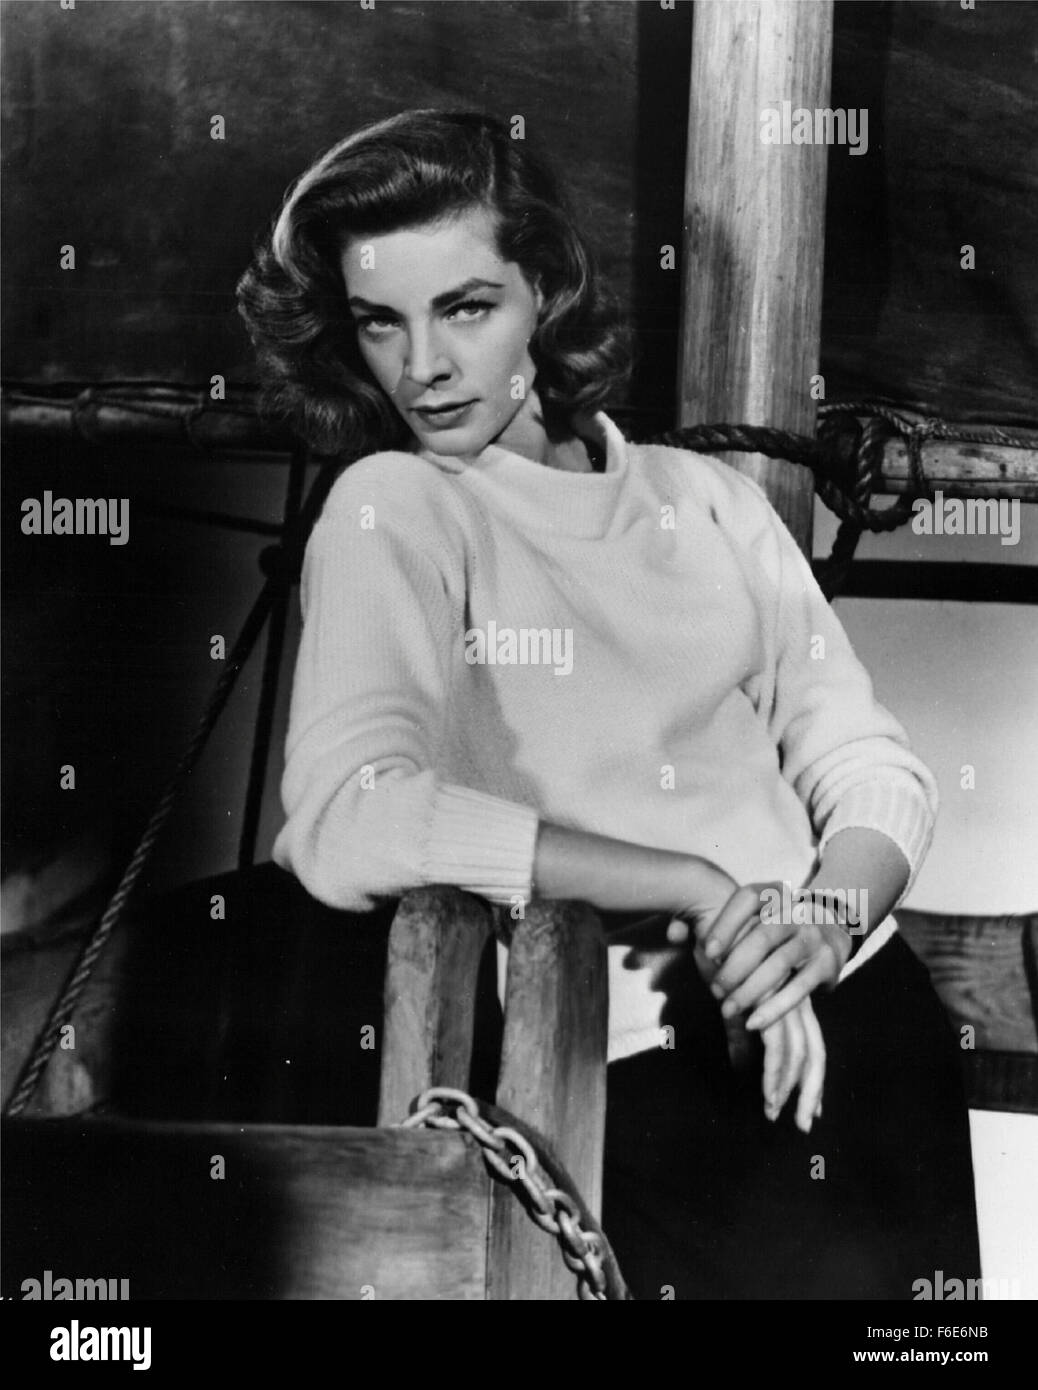 RELEASE DATE: 1955. STUDIO: Warner Brothers. PLOT: A merchant marine captain, rescued from the Chinese Communists by local visitors, isshanghaied into transporting the whole village to Hong Kong on an ancient paddle steamer.  PICTURED: LAUREN BACALL. Stock Photo